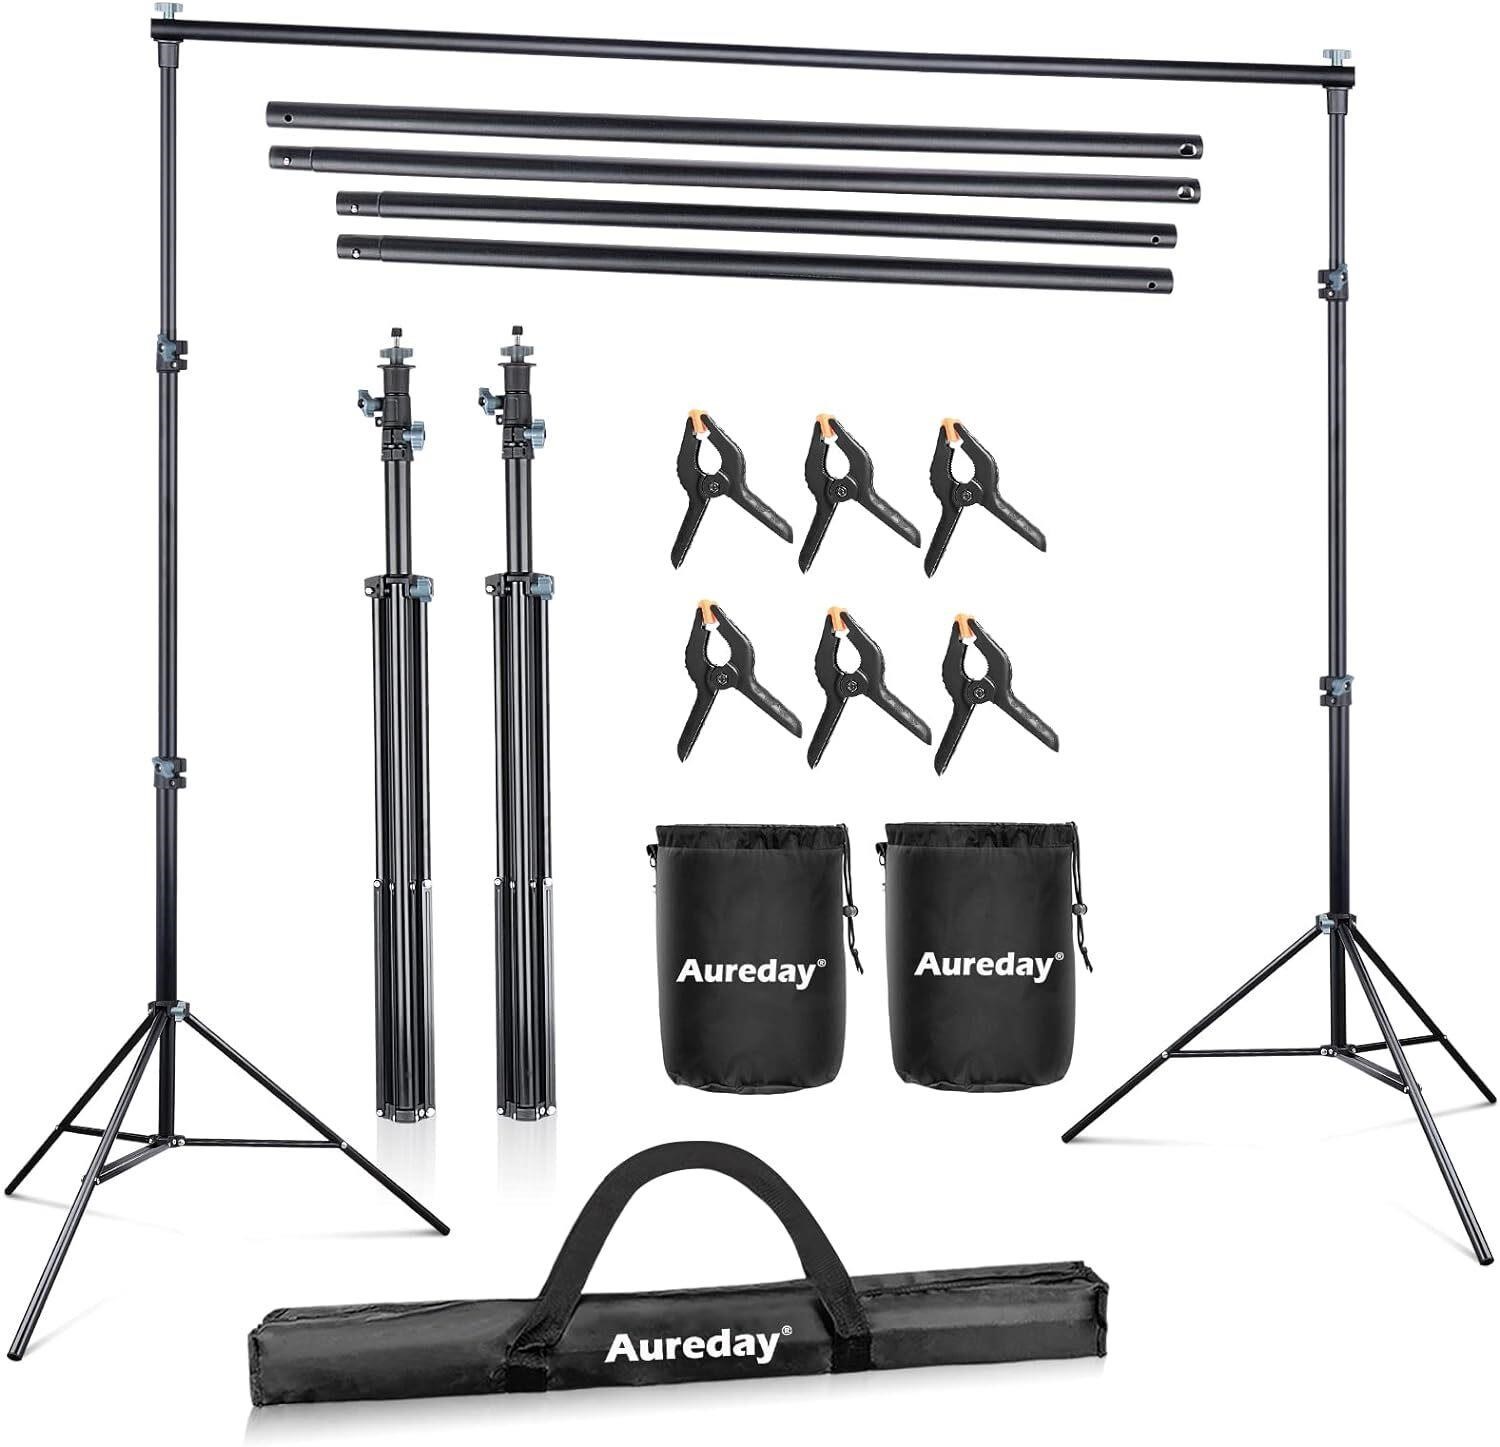 Aureday 10x8.5ft Backdrop Stand with Bag